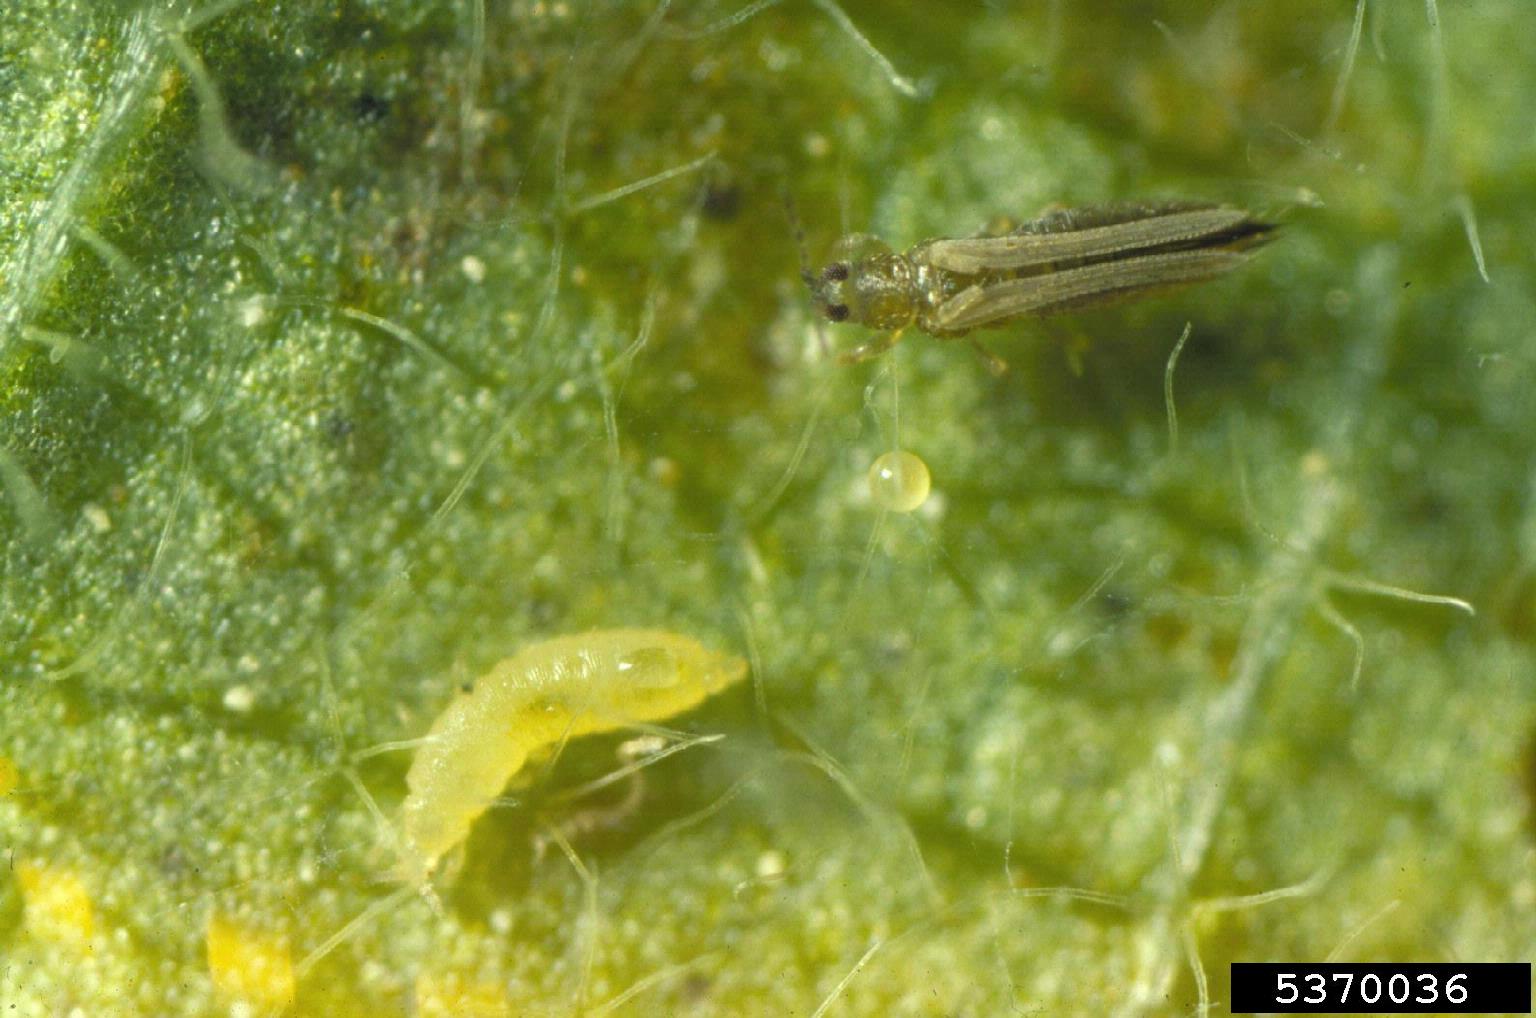 Adult and larva western flower thrips